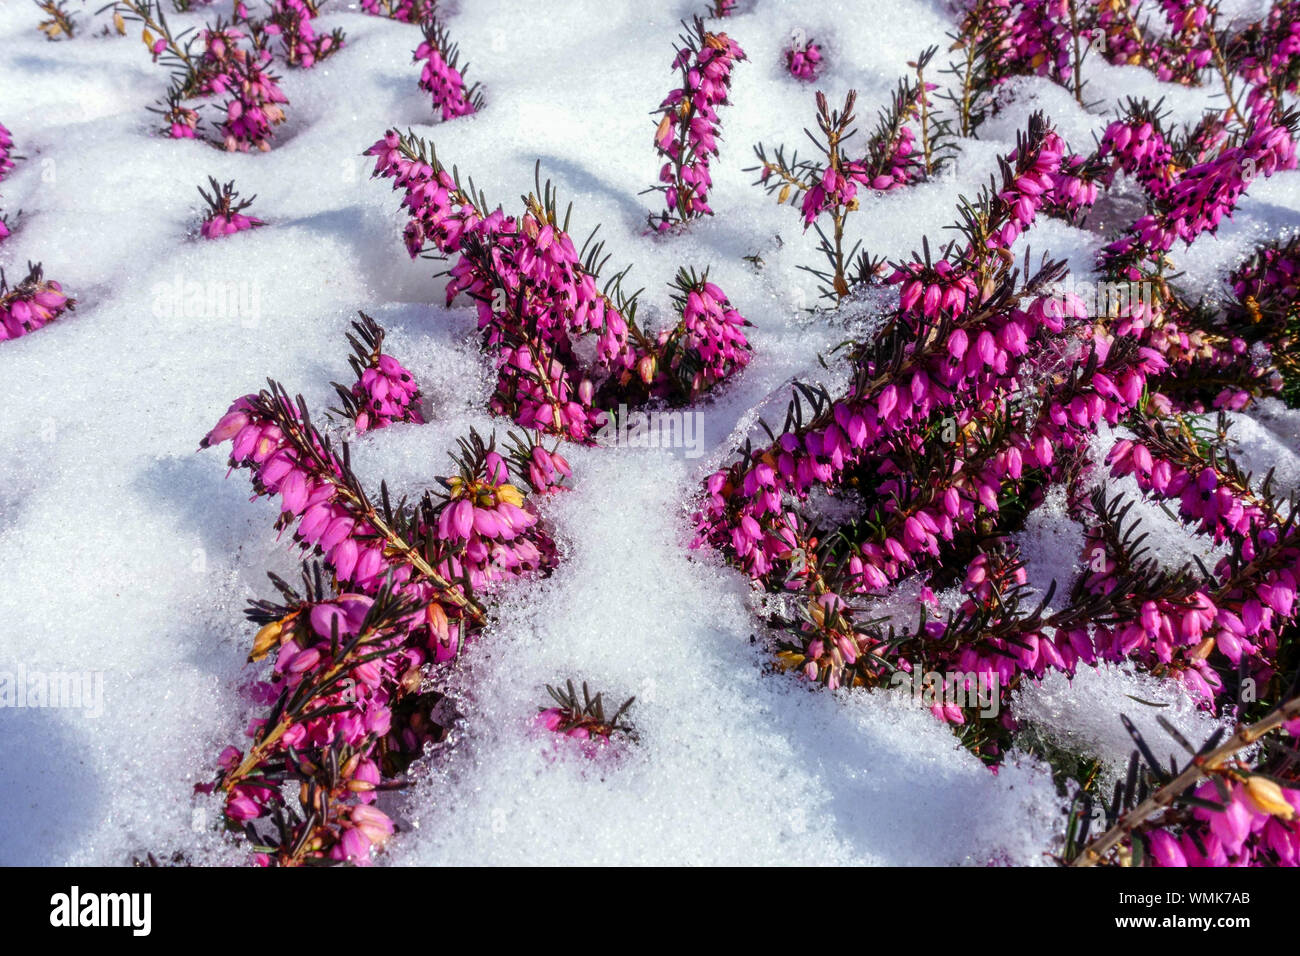 Erica carnea in snow Early spring flowers snow Stock Photo